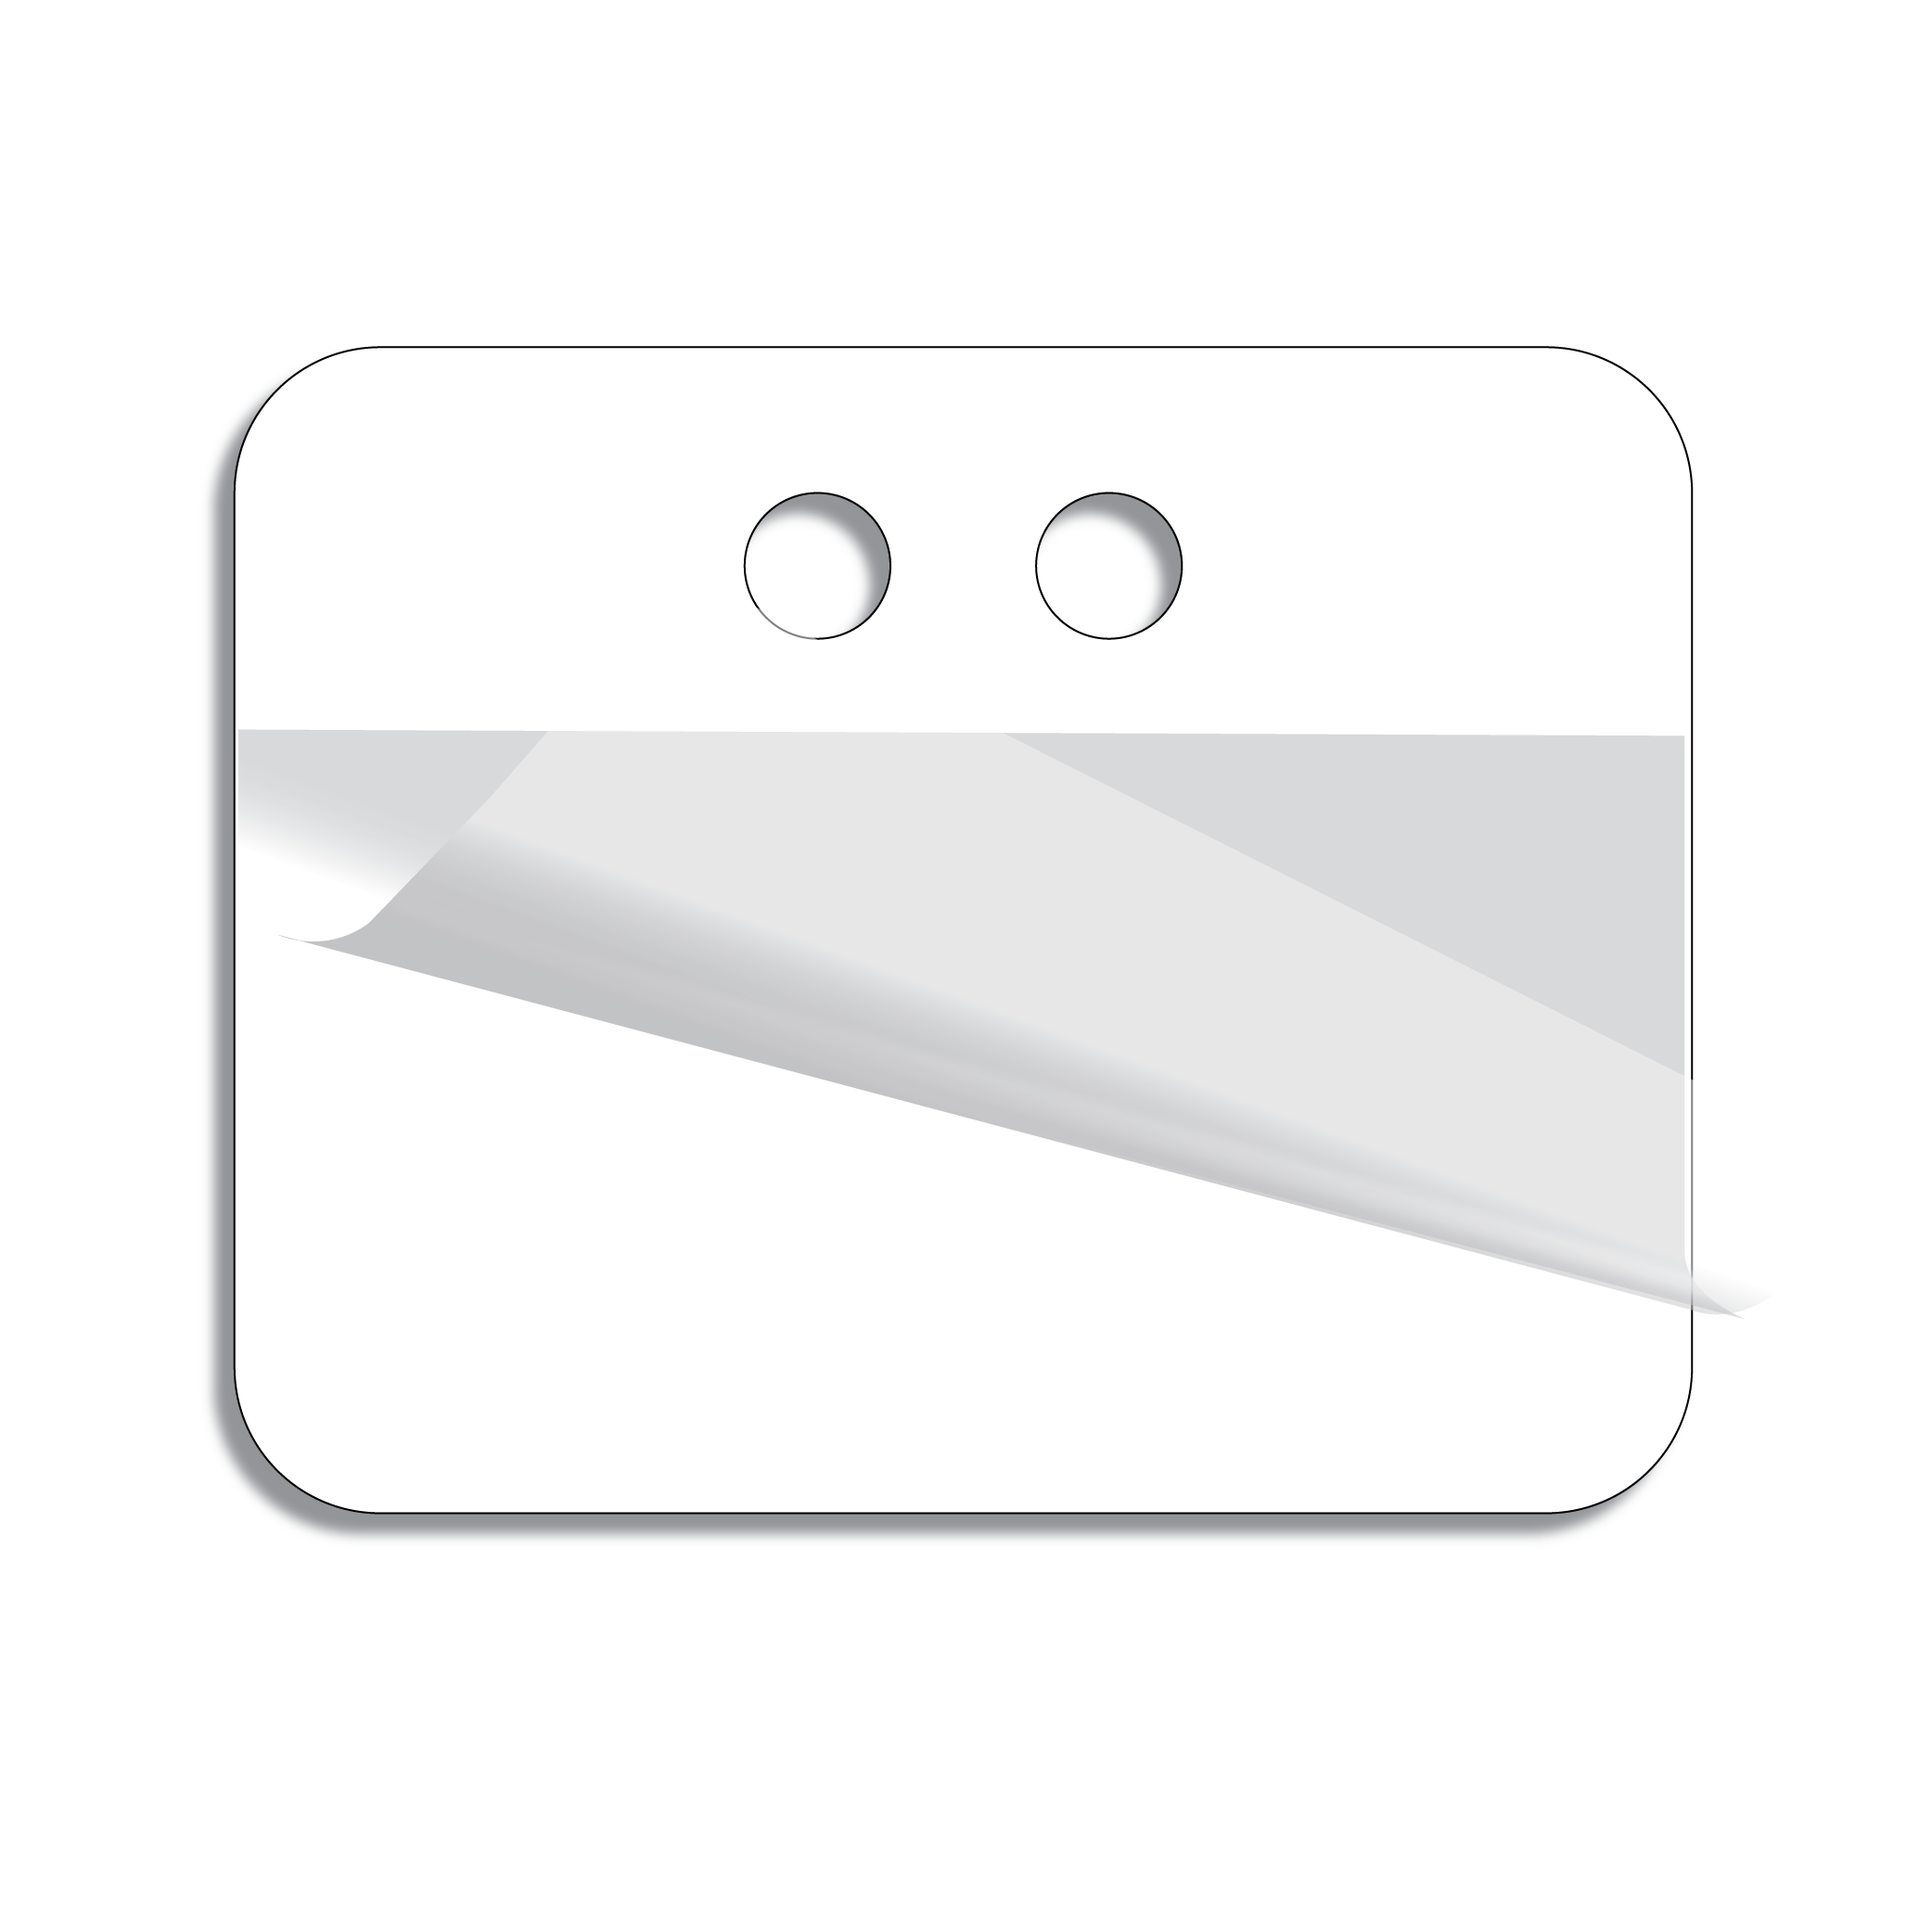 A rectangular, white plastic tag with rounded corners and two holes at center, top and a clear, self-laminating cover.